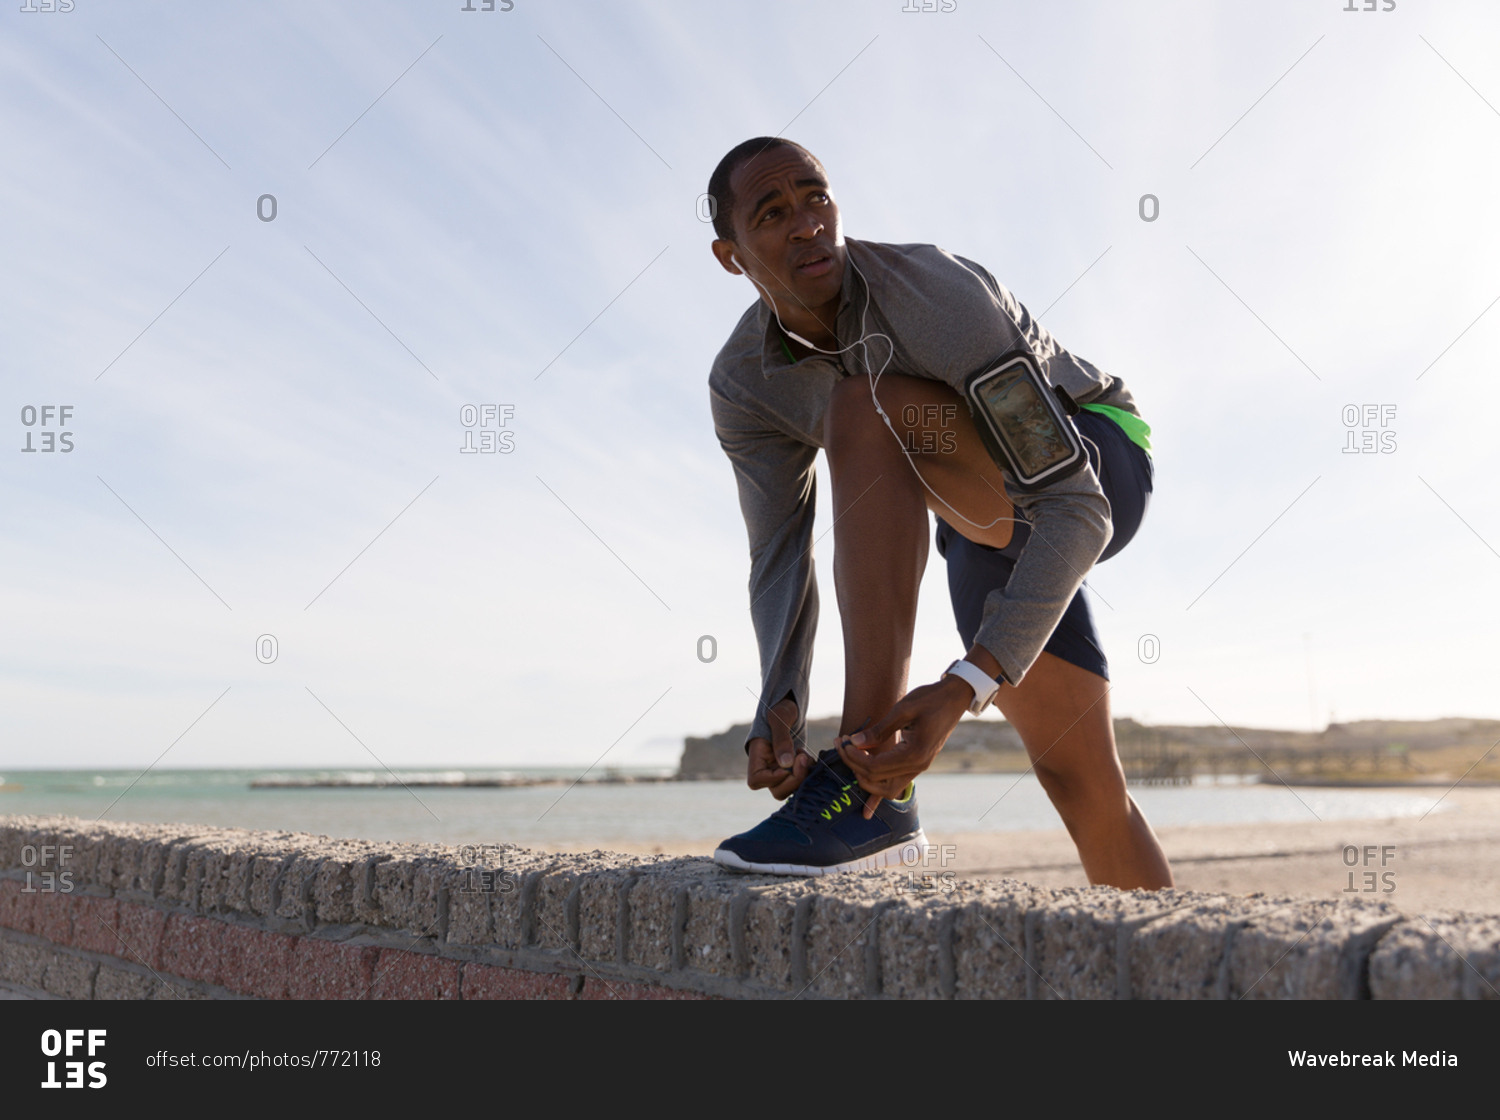 Male athlete tying his shoelaces on surrounding wall at beach